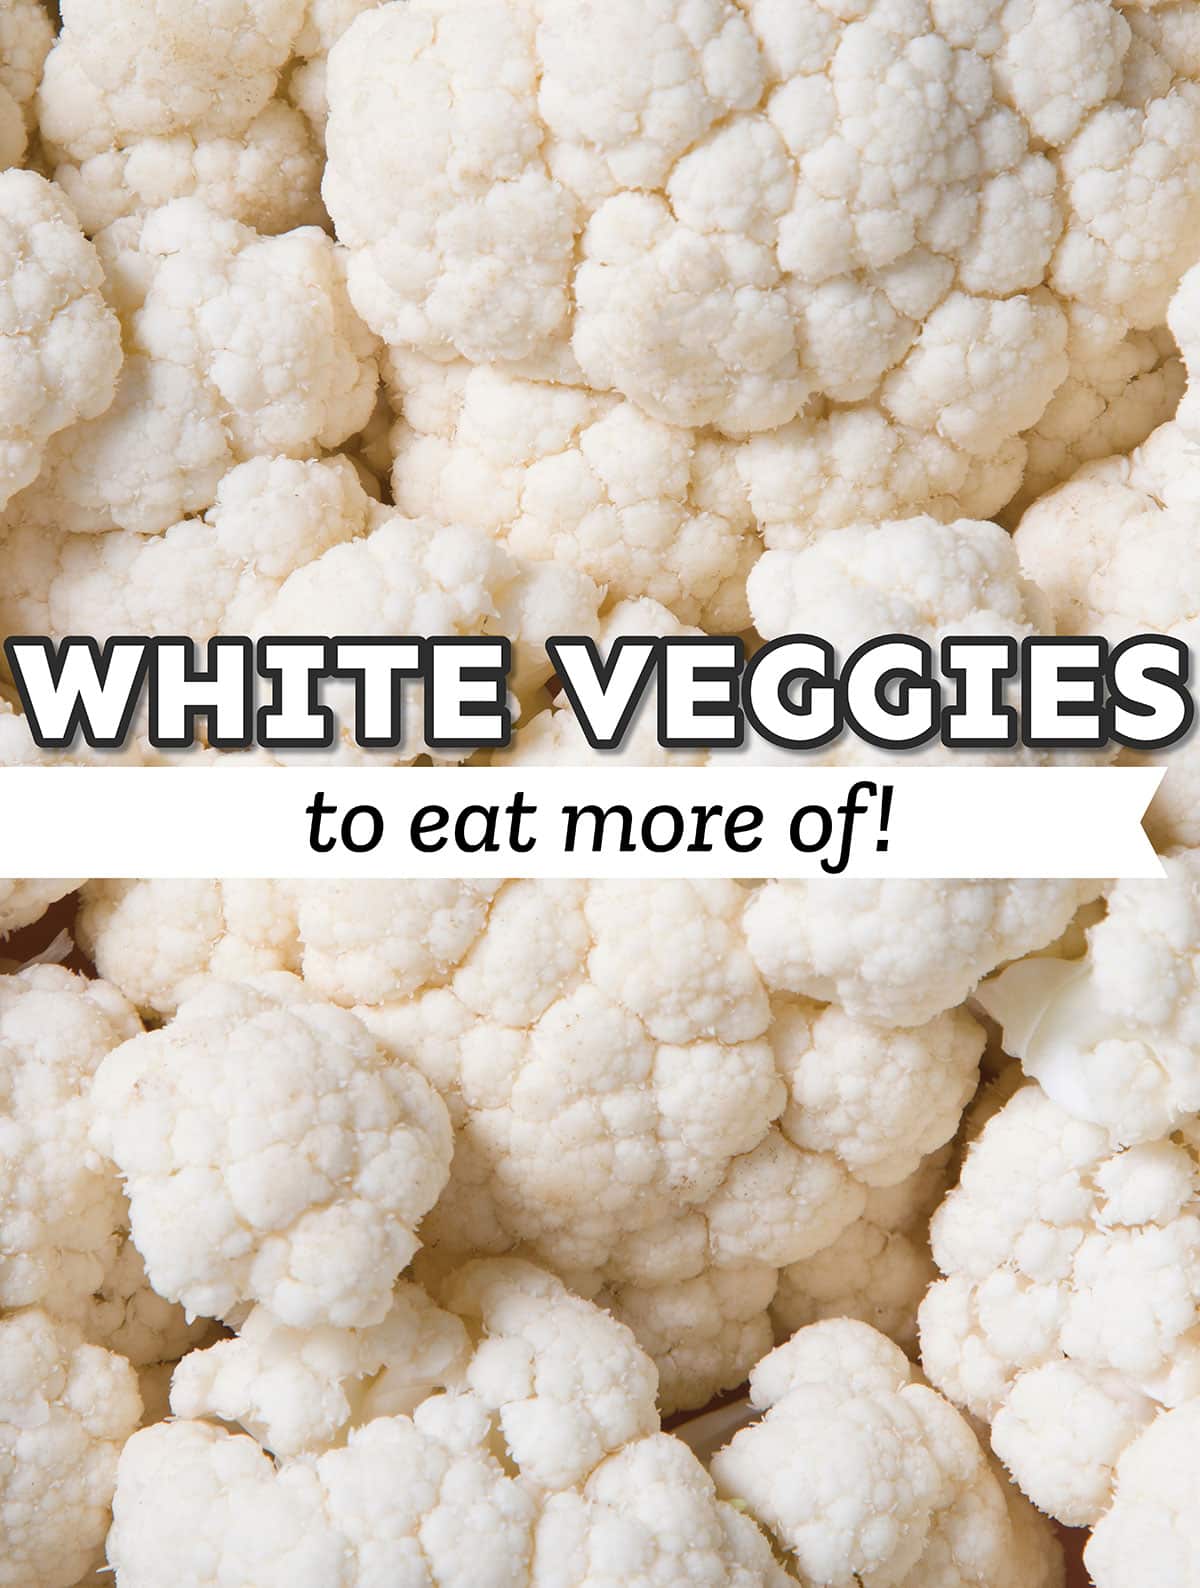 Collage that says "white vegetables".